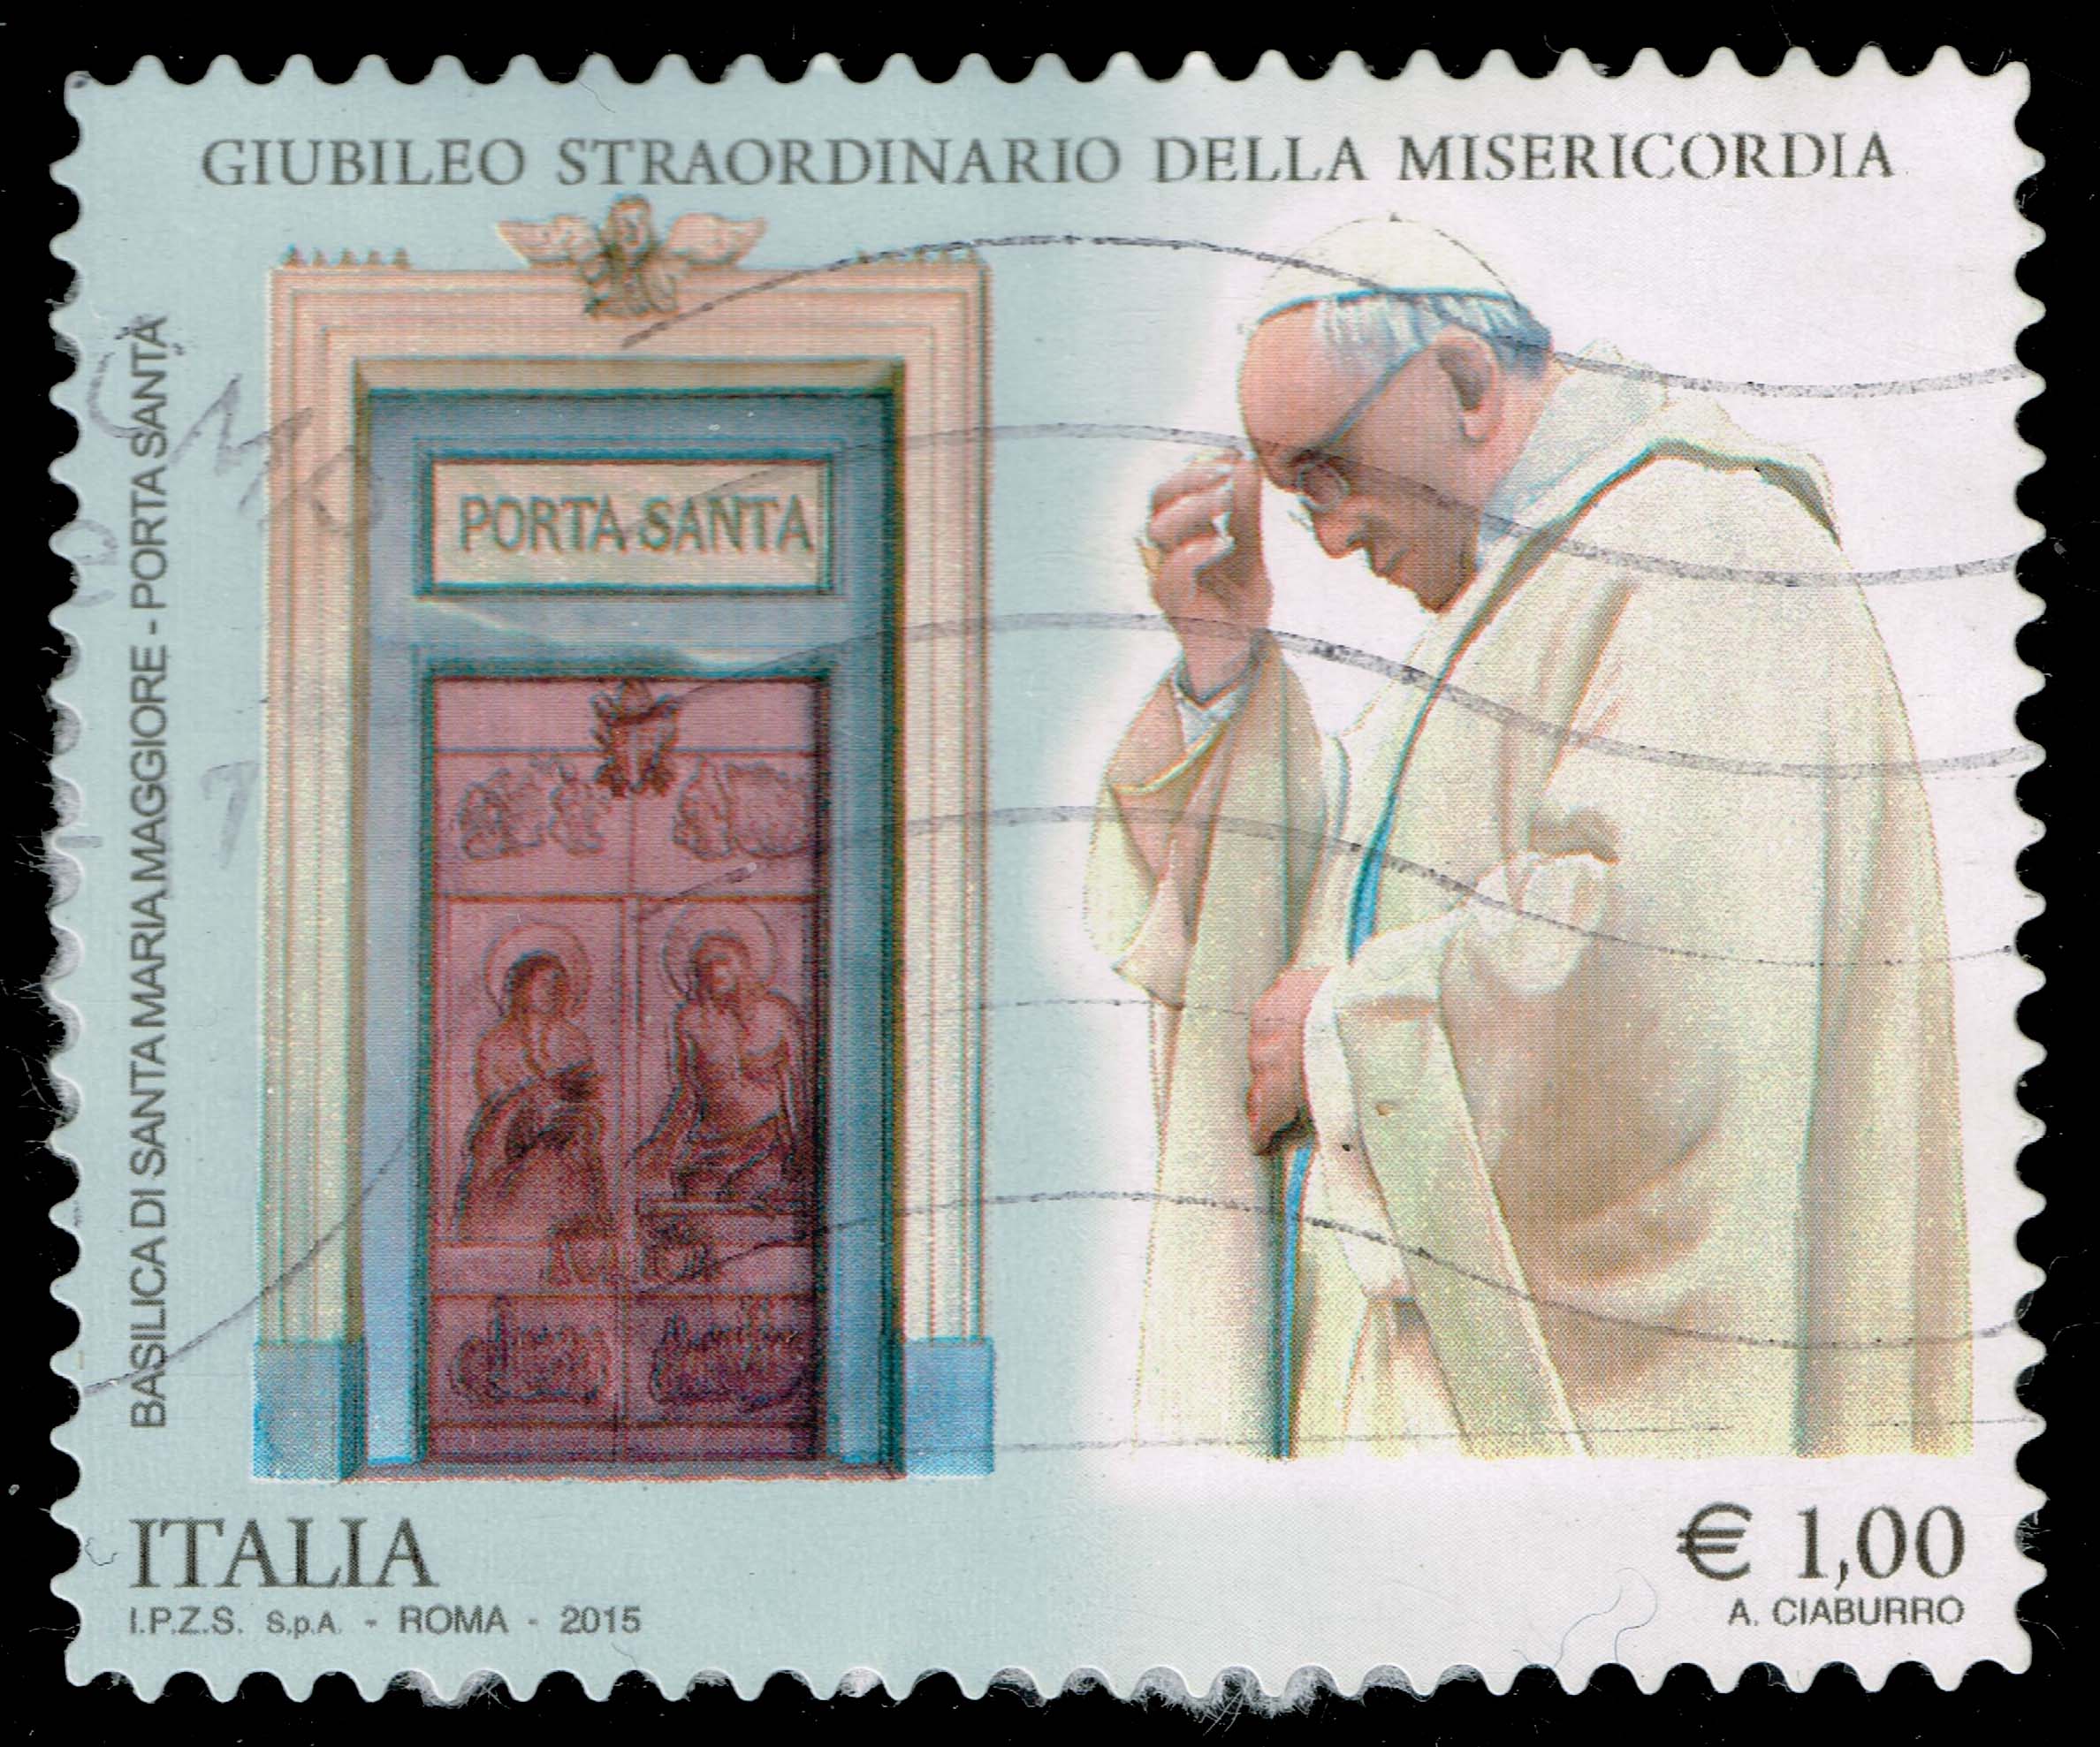 Italy #3357 Pope Francis and Door of St. Mary Basilica; Used